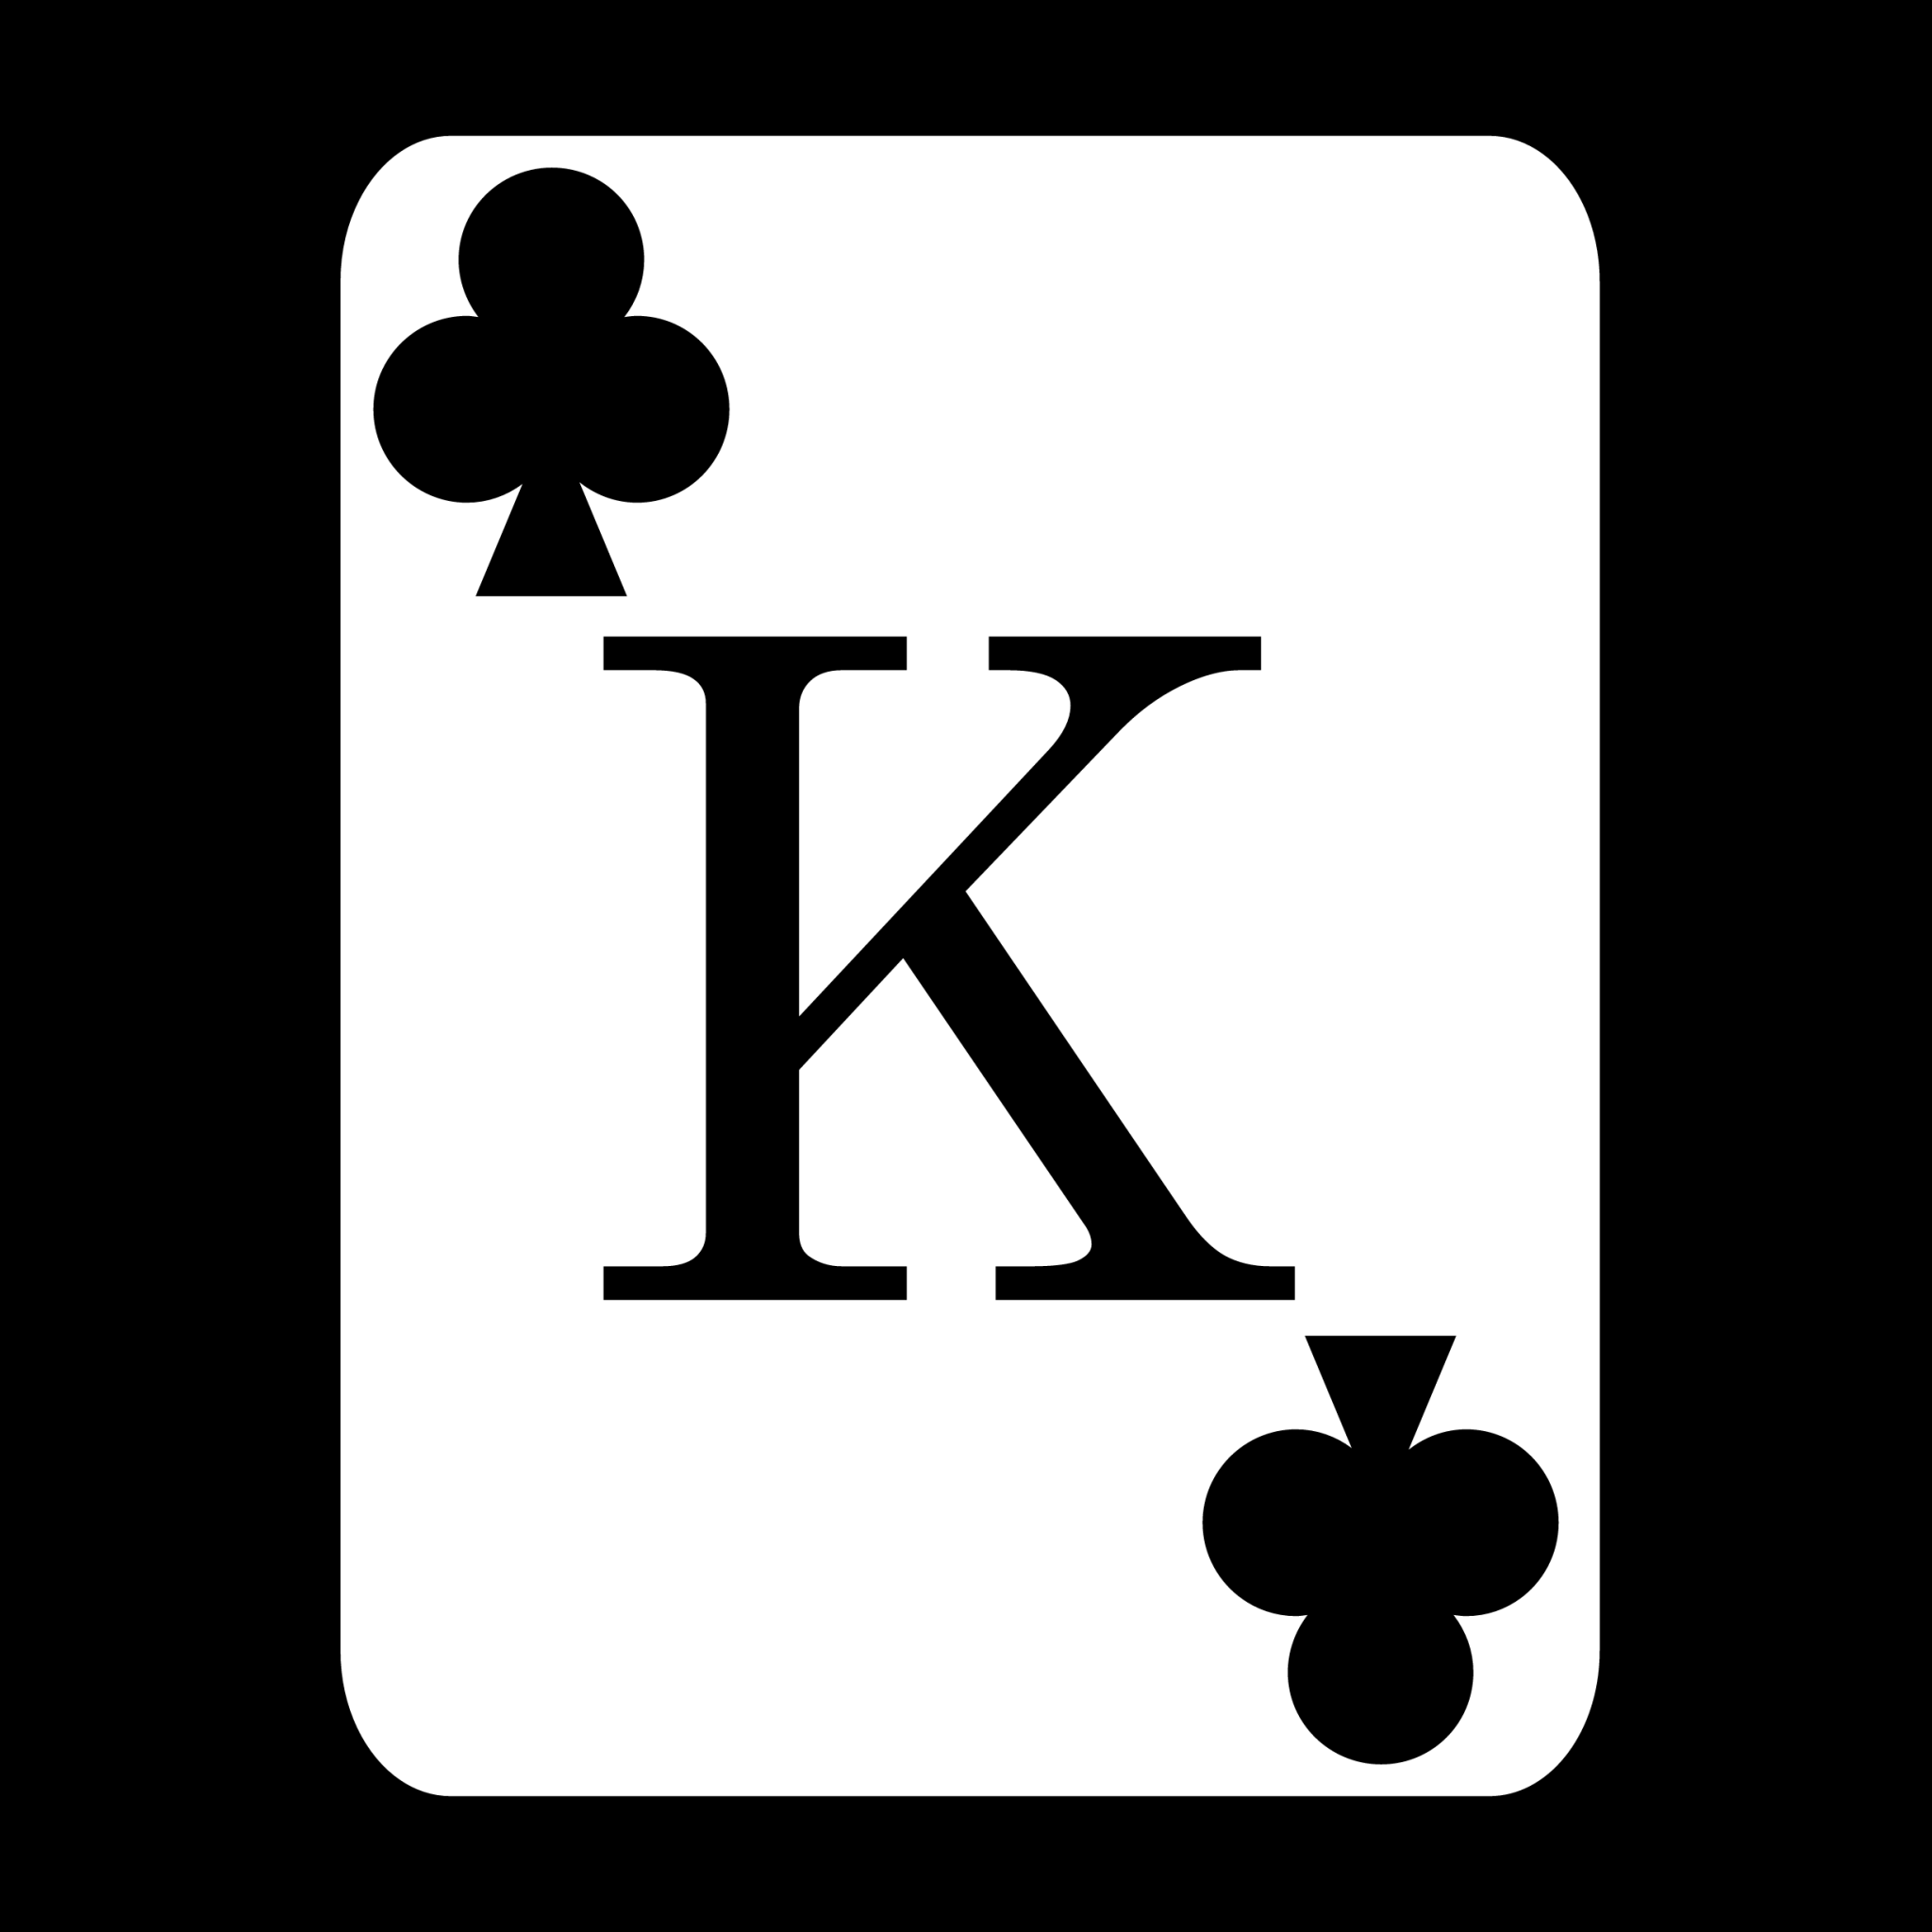 card king clubs icon